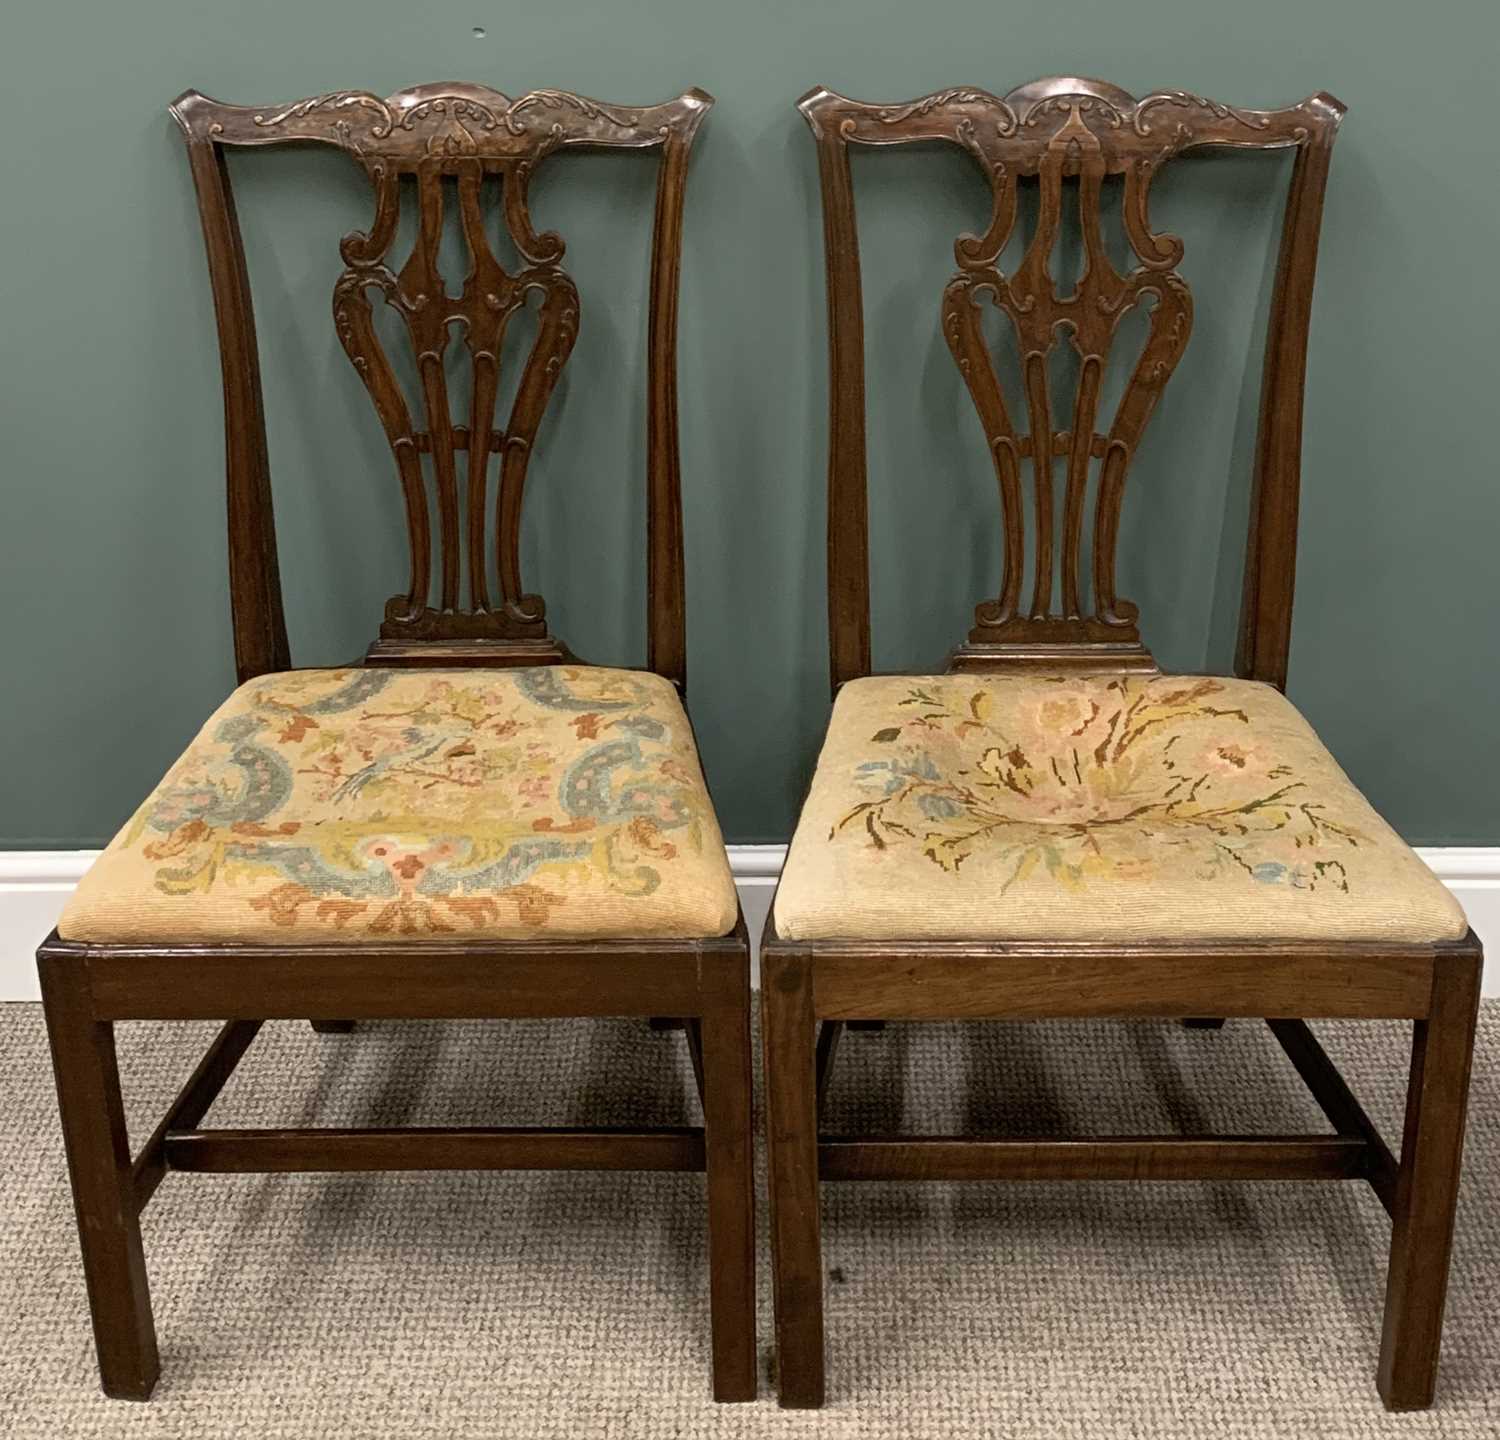 GOOD SET OF FIVE MAHOGANY CHIPPENDALE STYLE DINING CHAIRS with drop-in tapestry seats, 99 (h) x - Image 3 of 3